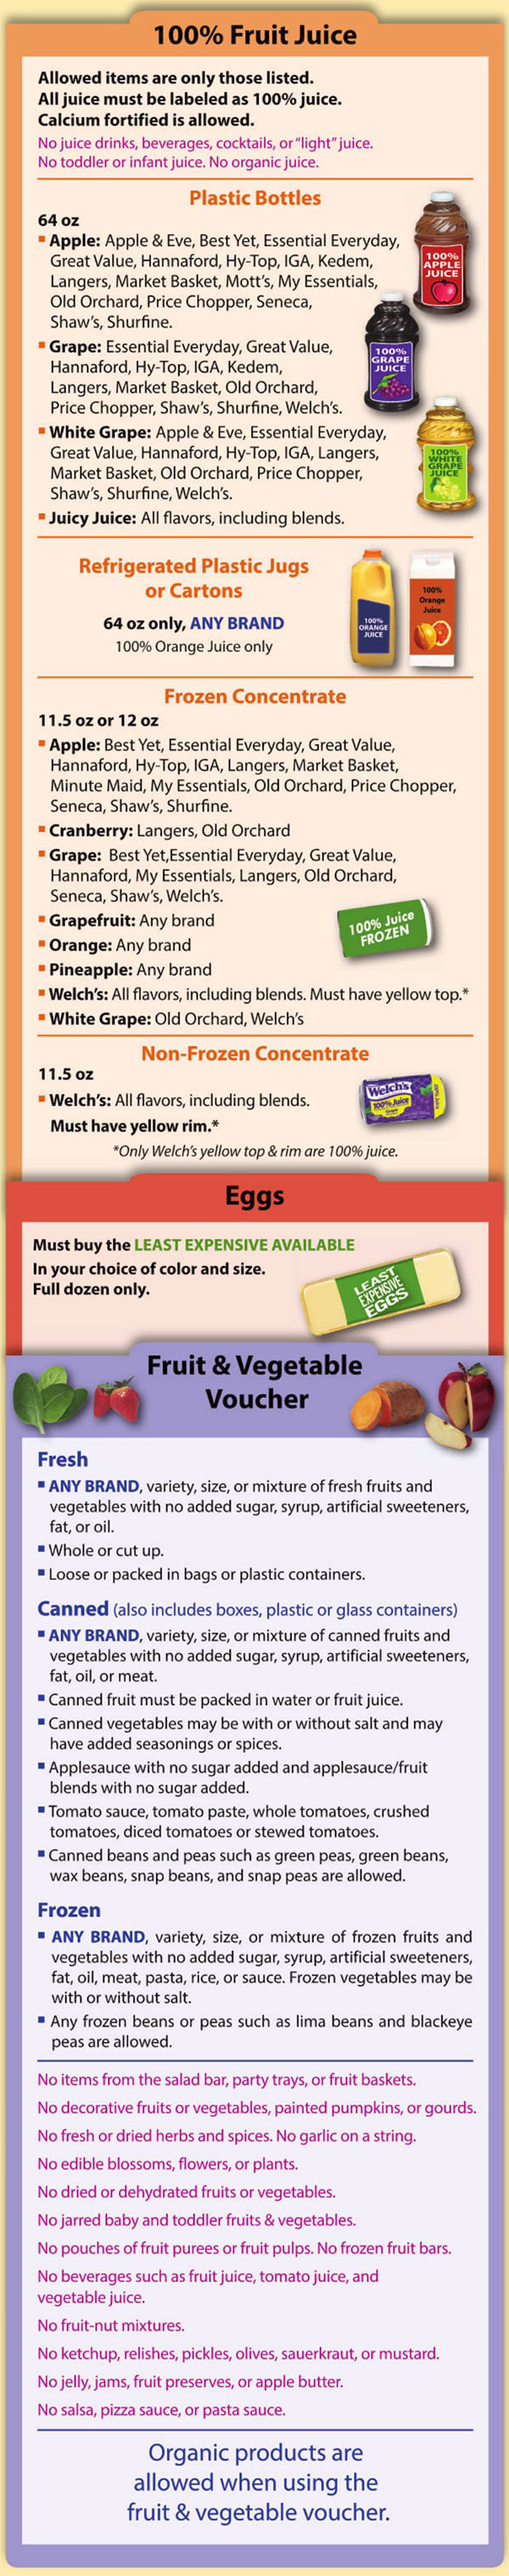 New Hampshire WIC Food List Fruit Juice, Eggs, Fruits and Vegetables